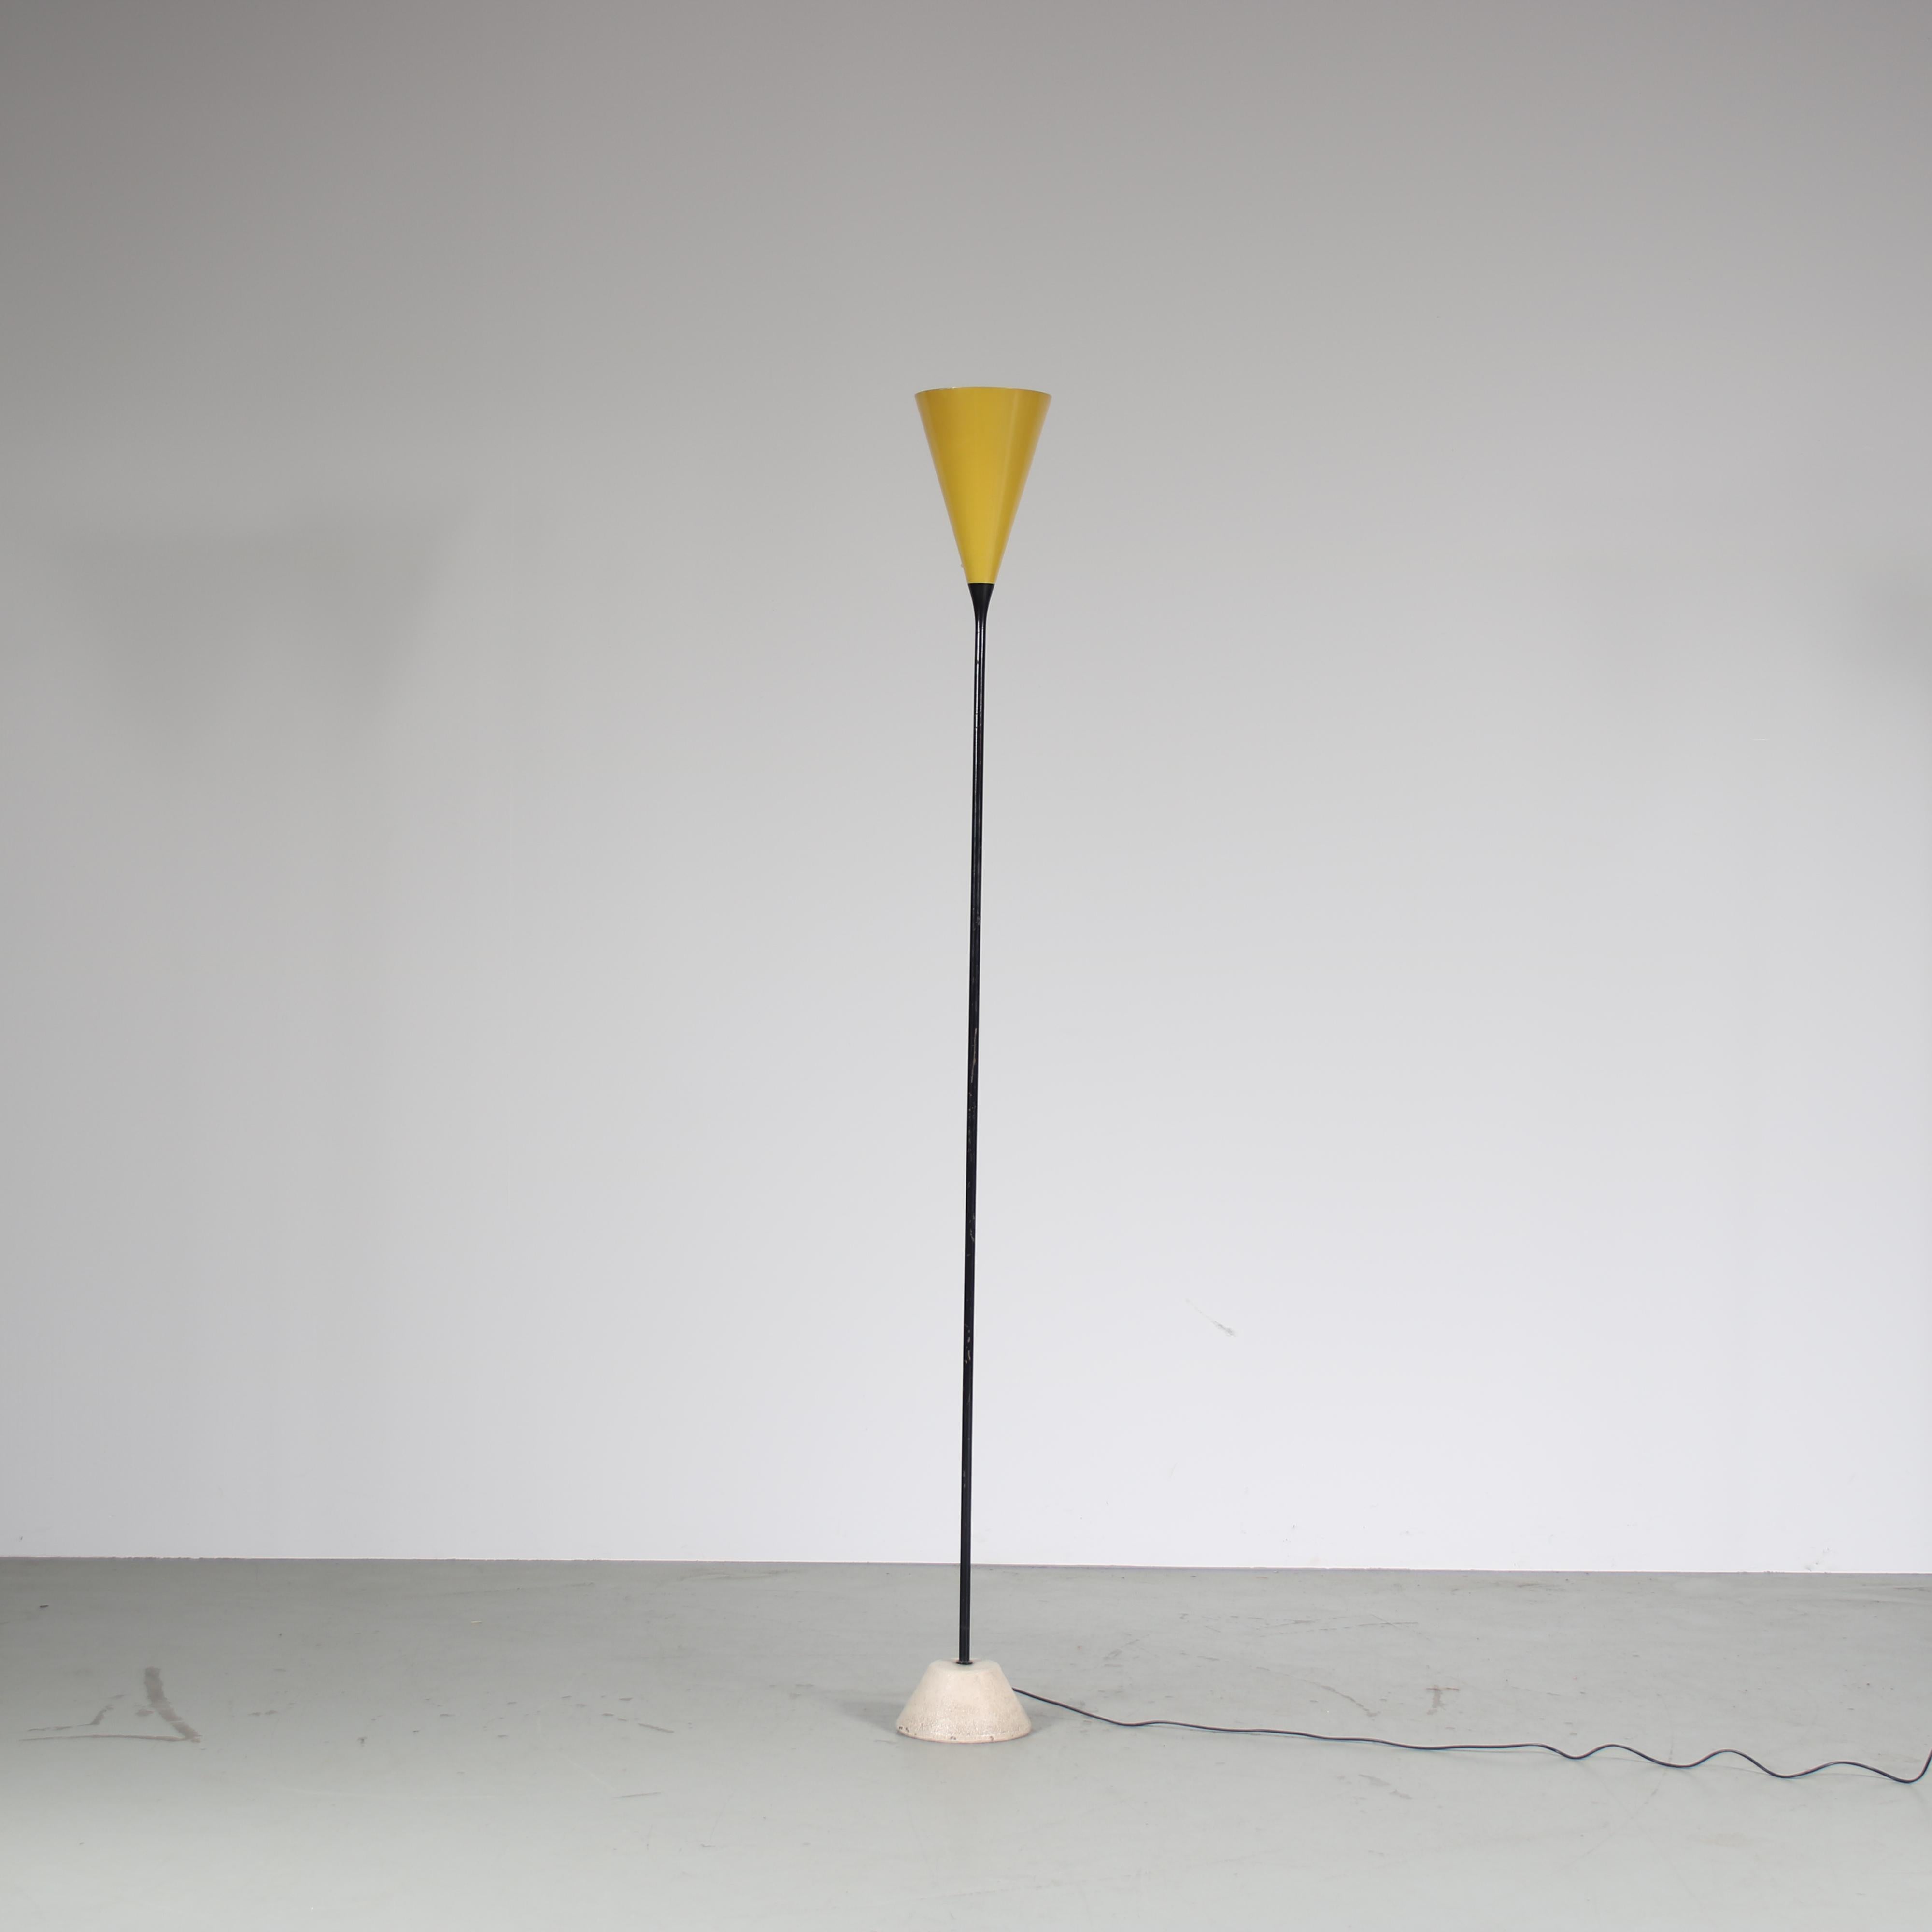 

An iconic 1950s floor lamp, model “1051M”, designed by Gino Sarfatti and manufactured by Arteluce in Italy.

This elegant, minimalist piece has a wonderful appeal that nicely combines colours, materials and shapes. It’s a highly recognizable find